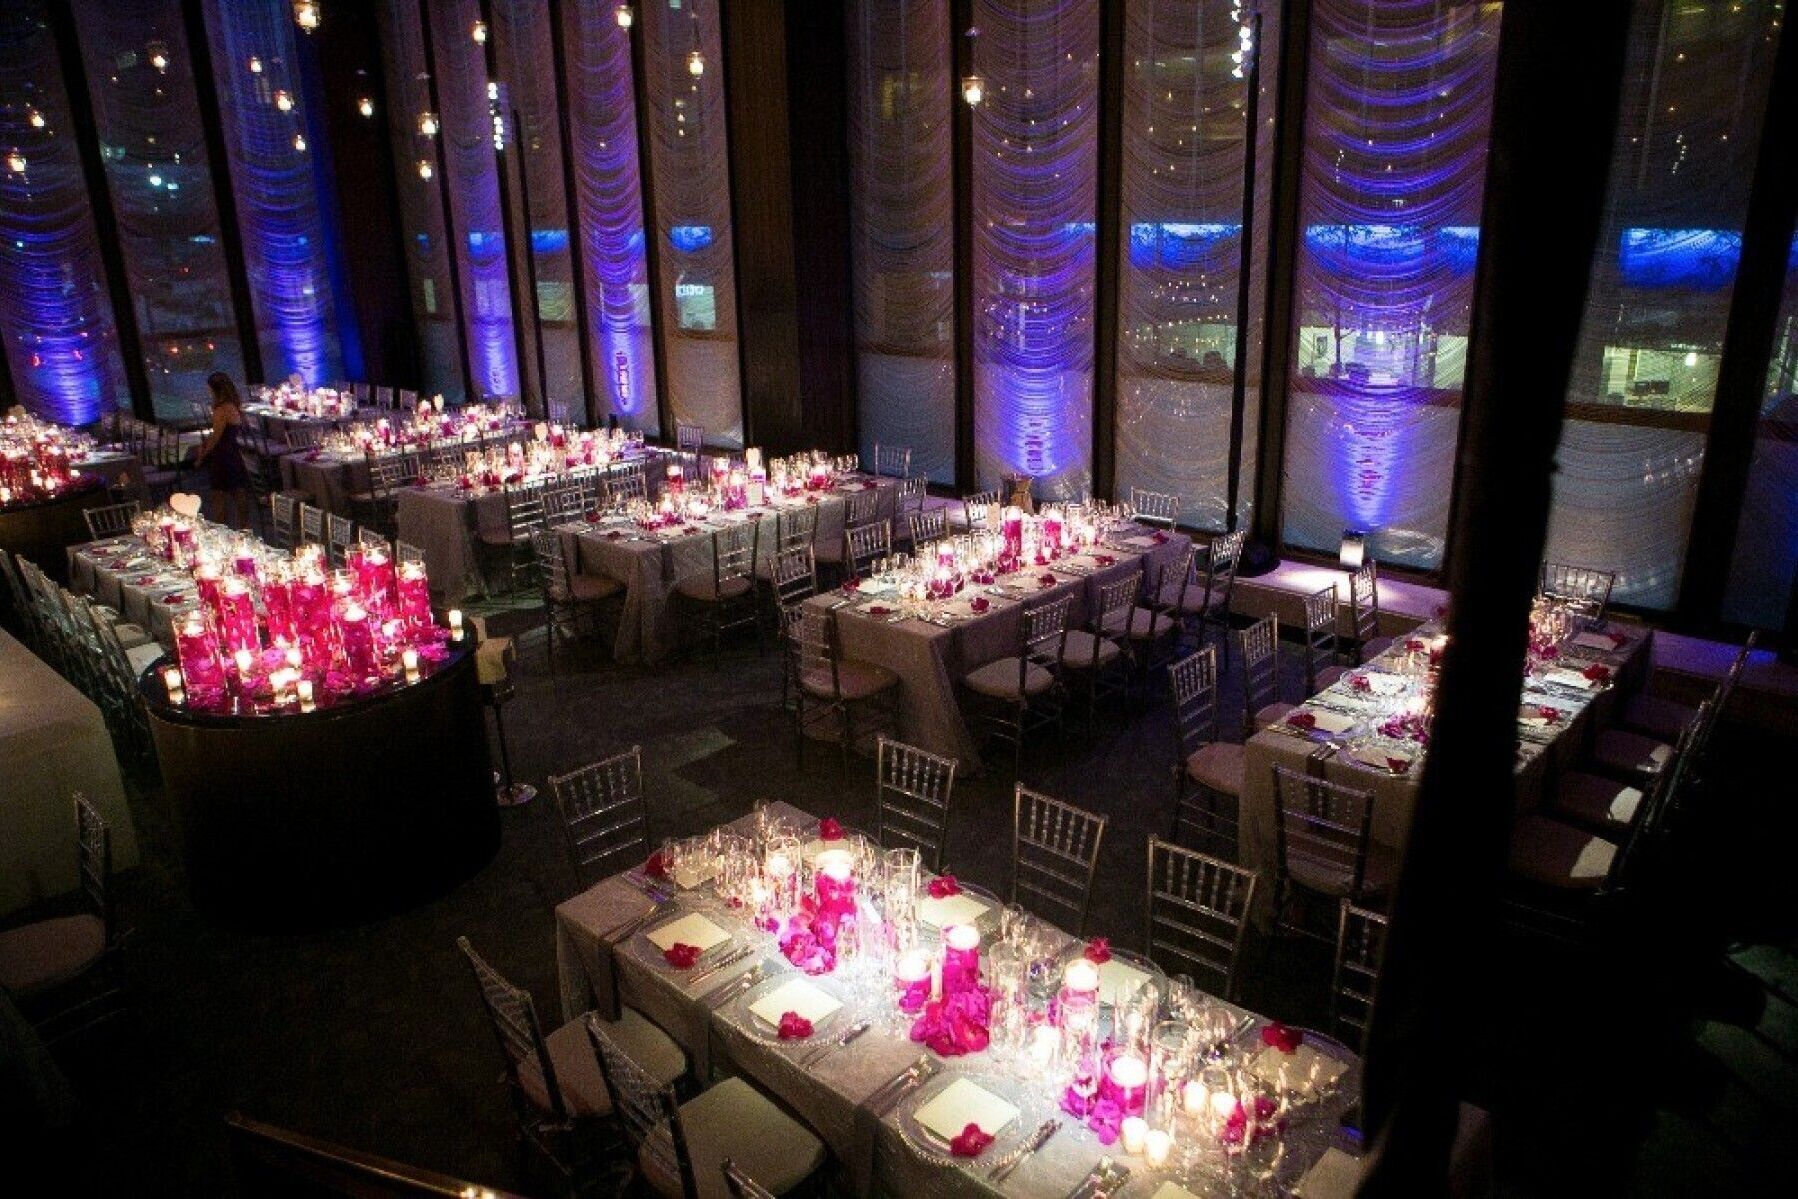 Celebrity Wedding: An indoor reception setup with rectangular tables in a dimly-lit room.